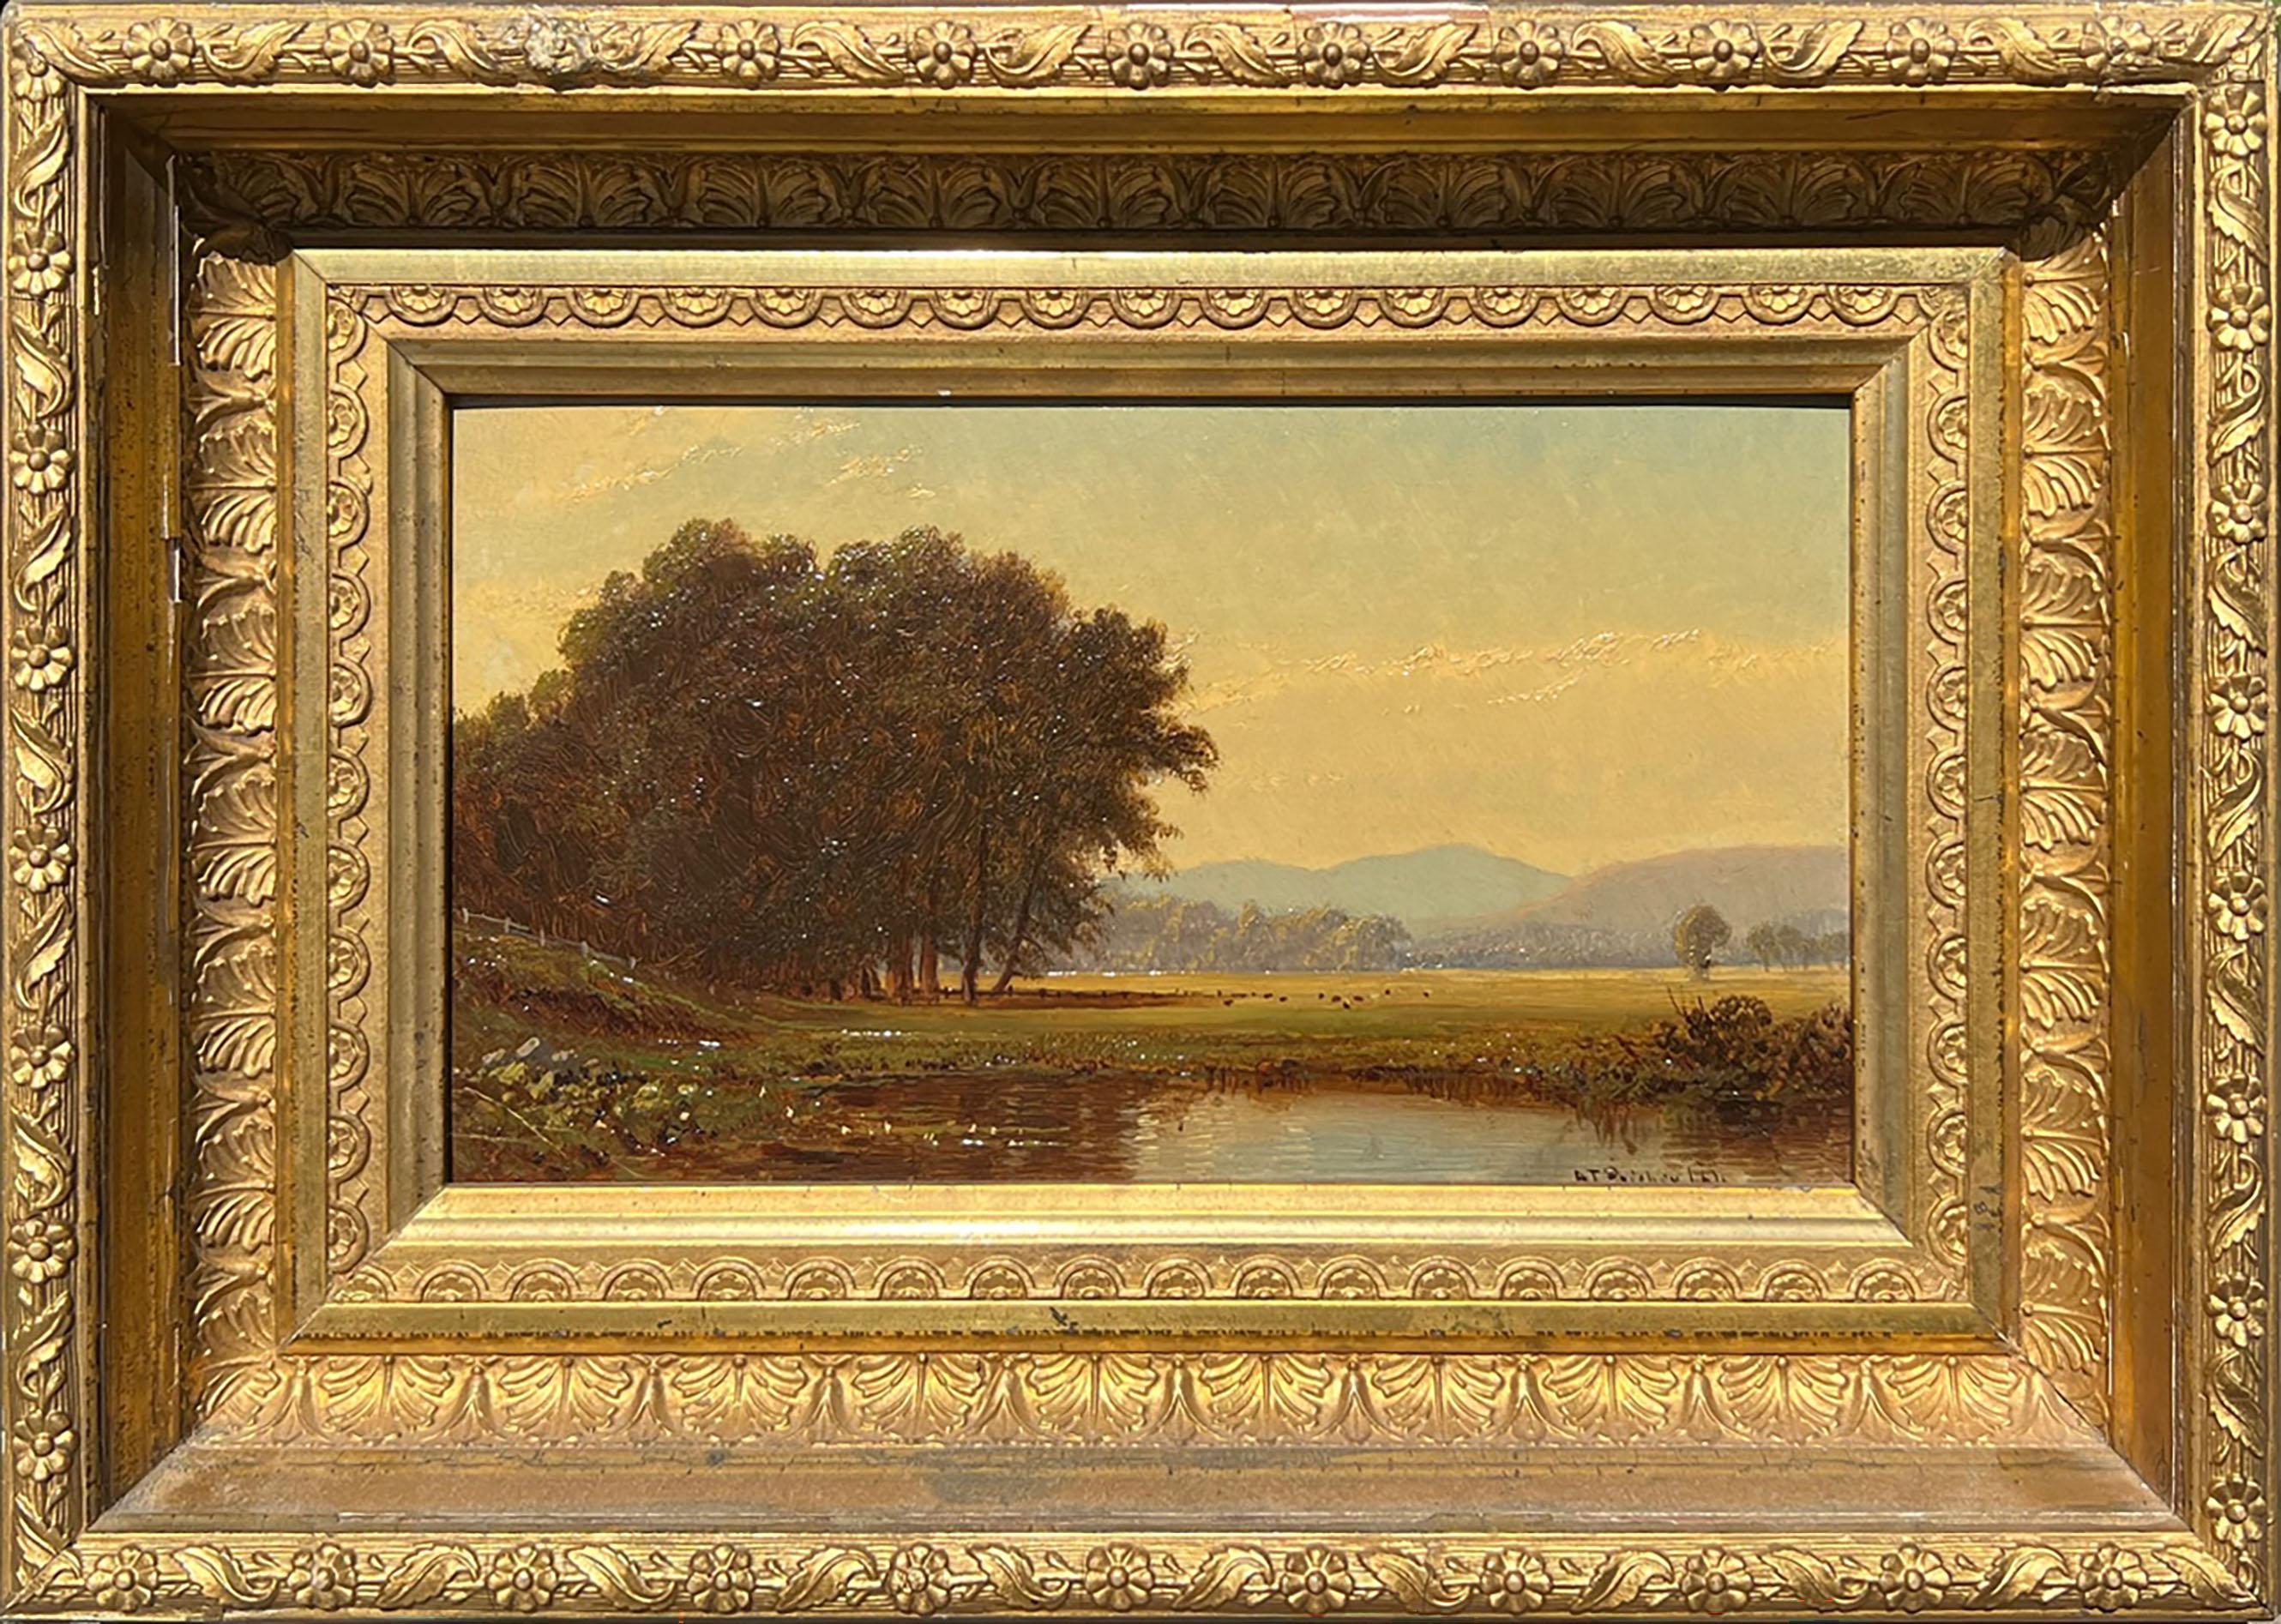 "Scene in the White Mountains" by Hudson River School artist Alfred Thompson Bricher (1837-1908) is oil on panel and measures 5.5 x 9.75 inches. The painting is signed and dated 1864 at lower right. The work is in a beautiful, period appropriate